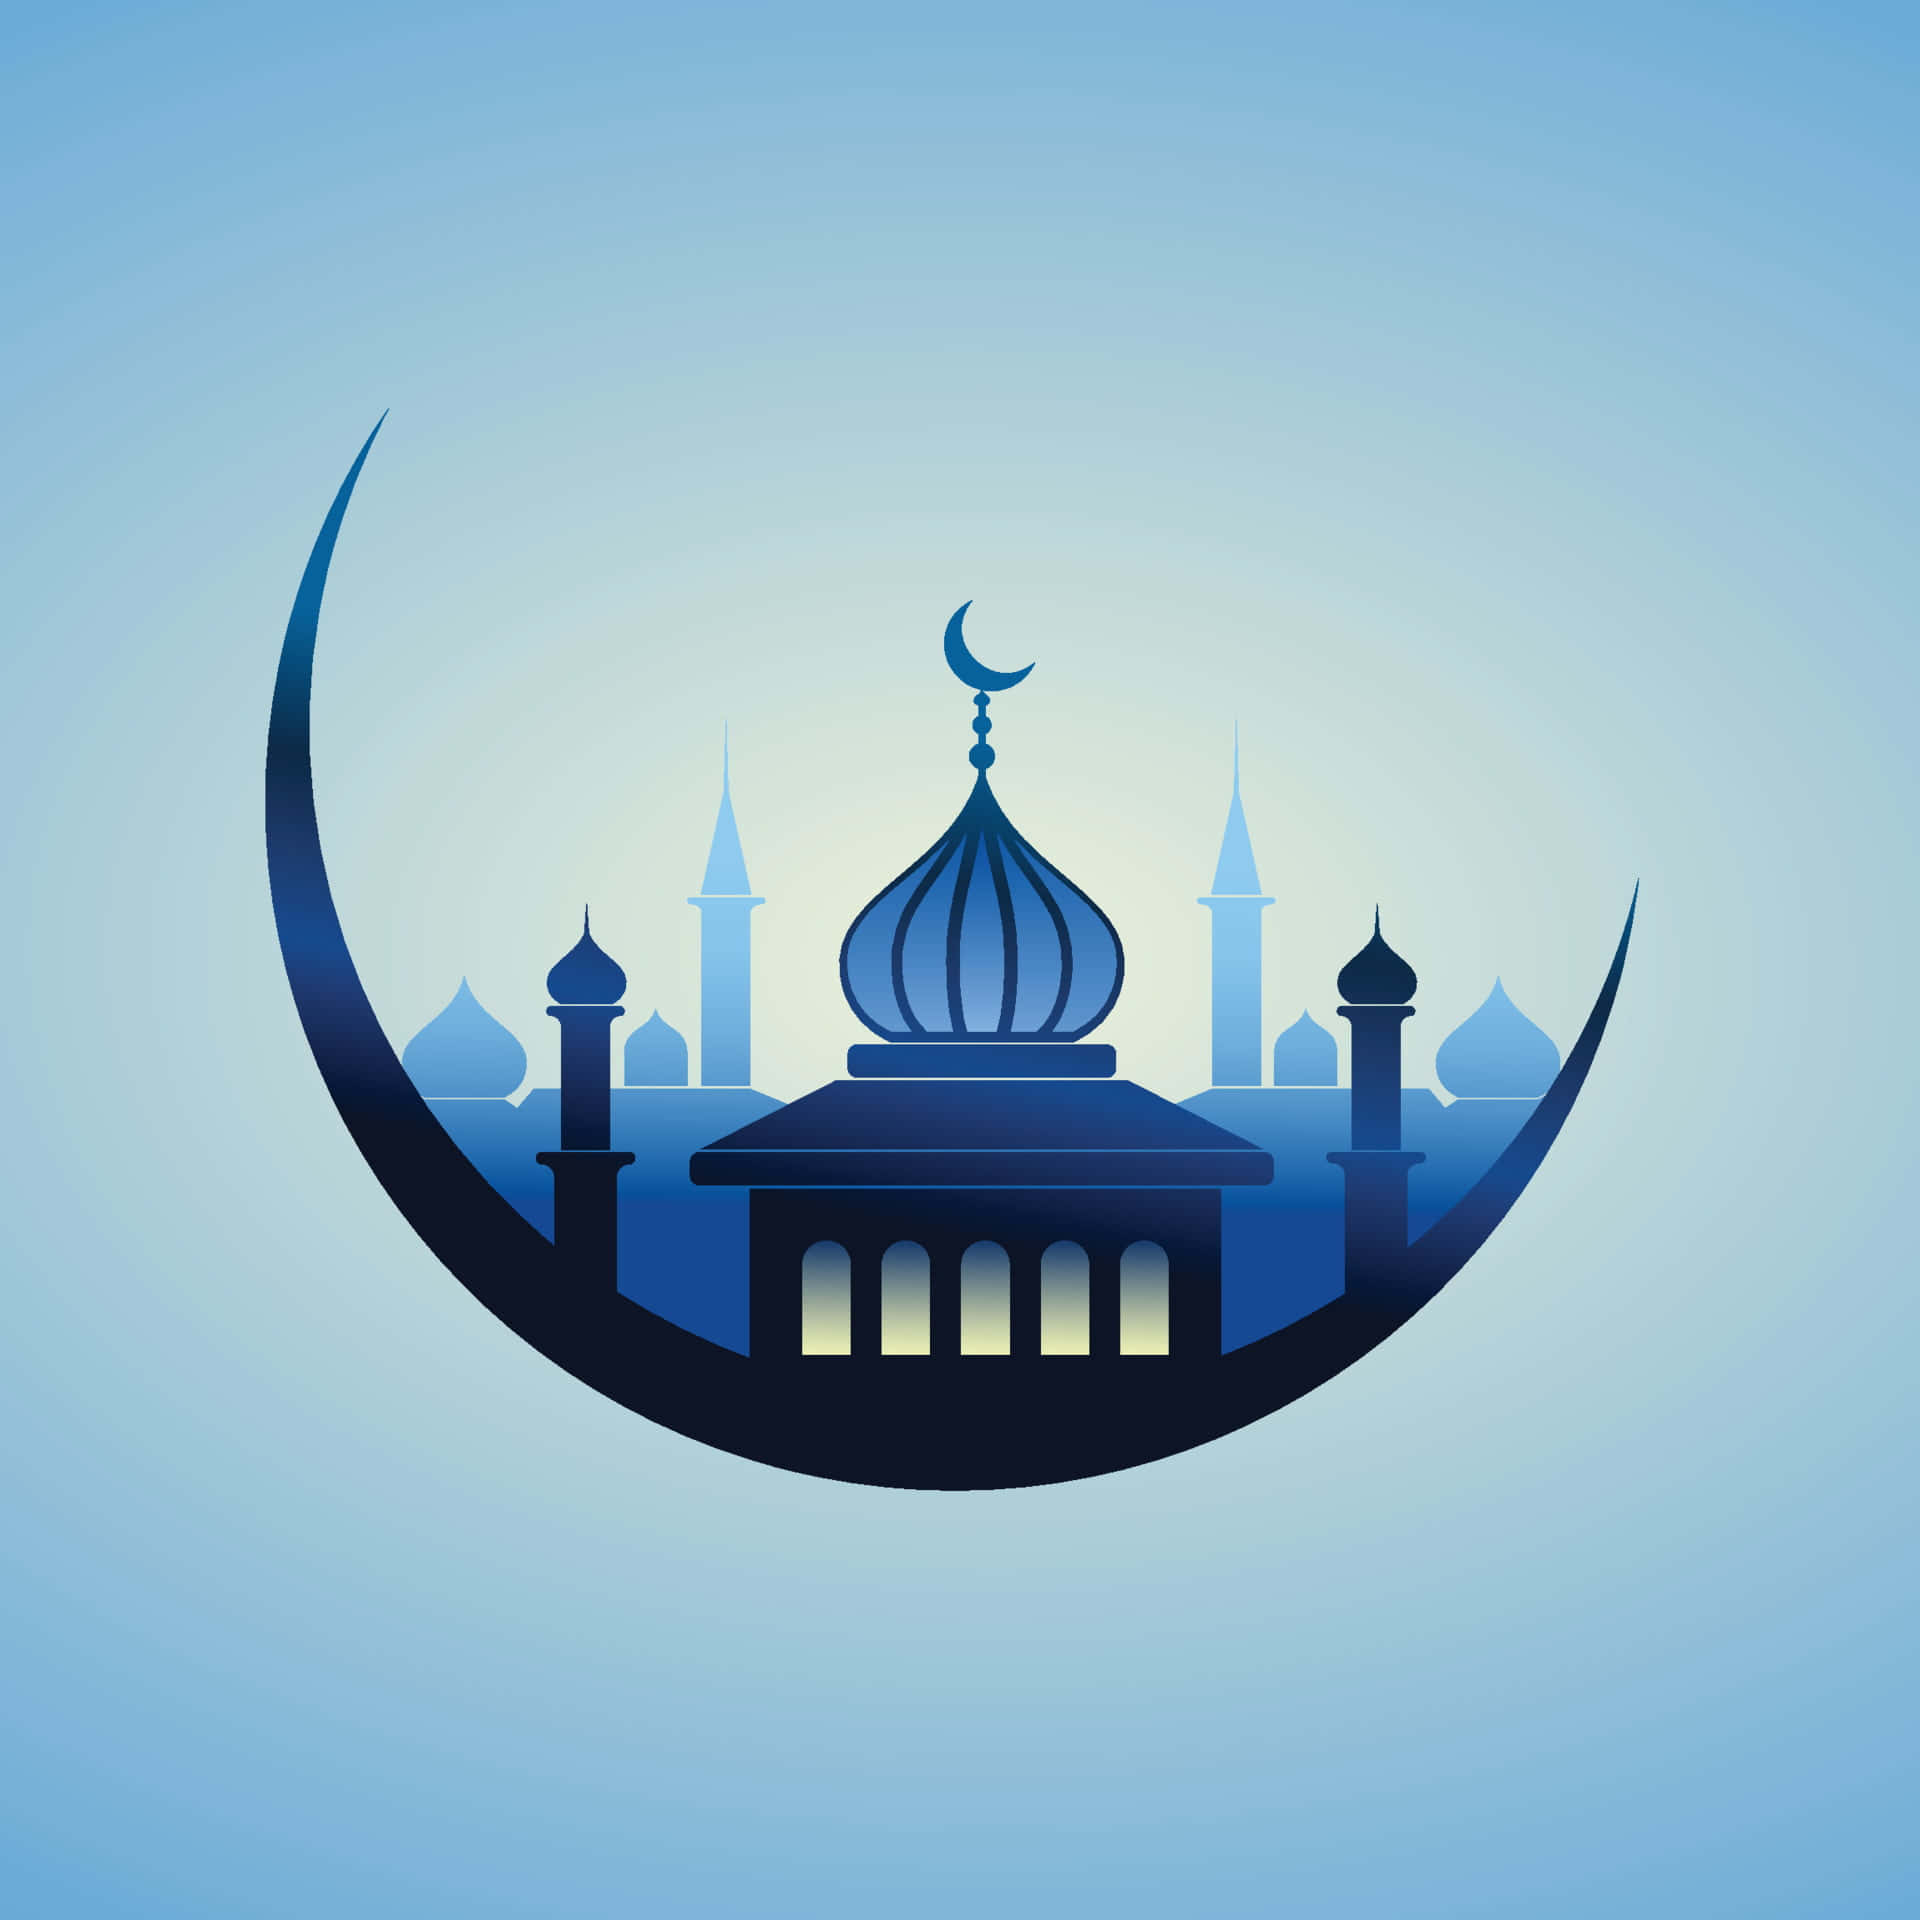 Mosque Inside A Crescent Moon Islamic Background